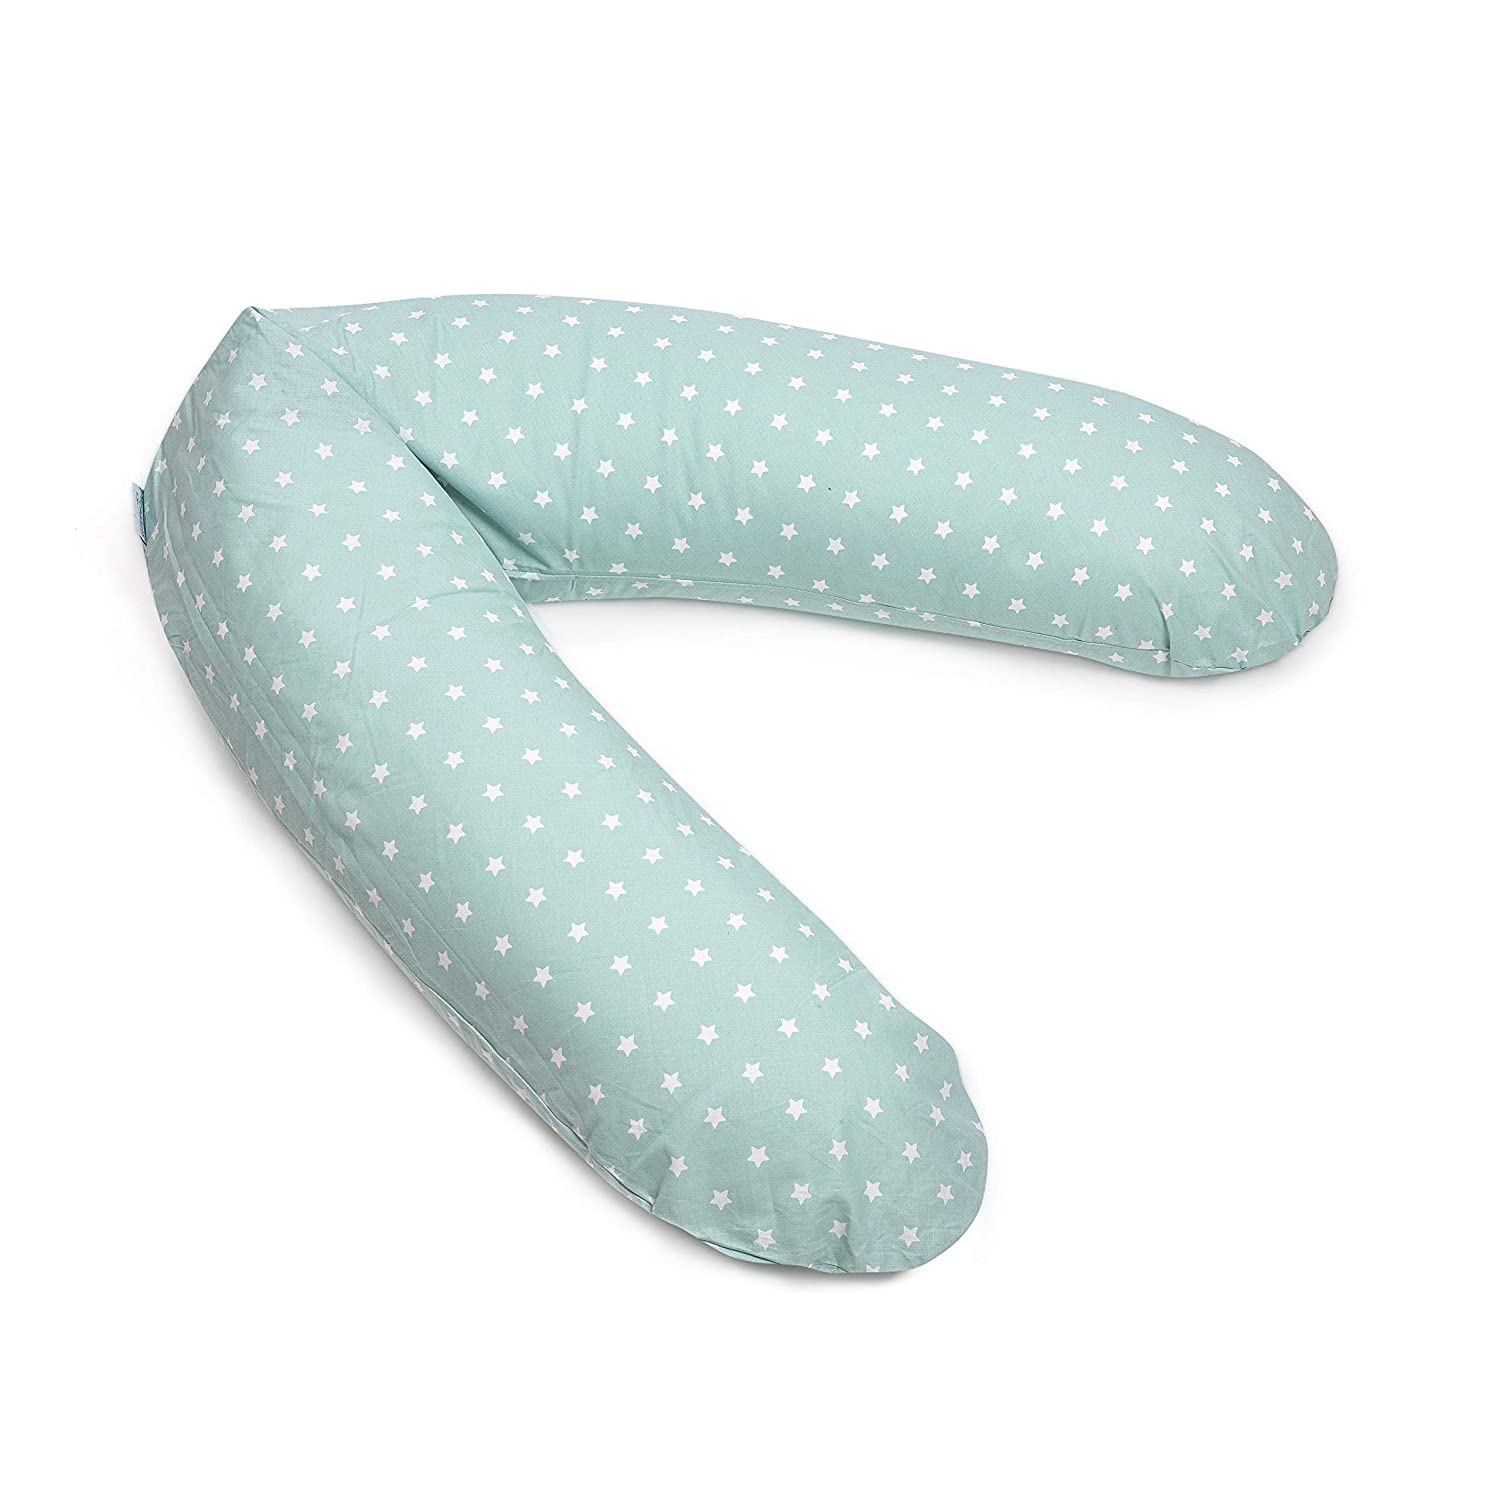 Honey Collection Breastfeeding Pillow, Soft and Cuddly EPS, Microbead Filling, Support Pillow, TÜV Certified, 100% Cotton Pregnancy Pillow 190 cm Stars celadon-green